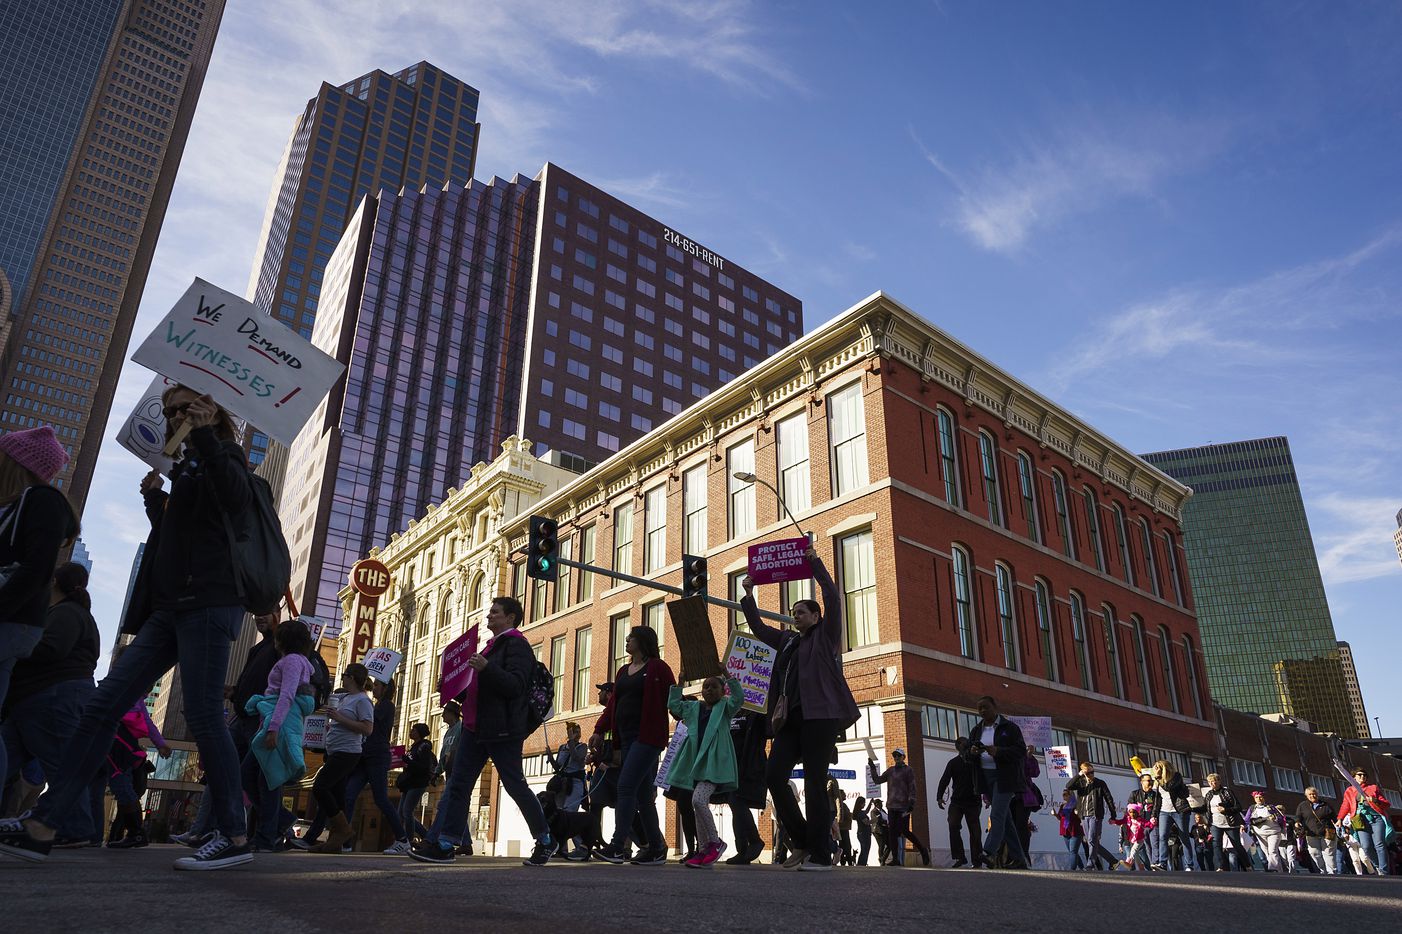 Participants in the 2020 Dallas Women's March walk along Harwood Street on their way to a rally at Dallas City Hall on Sunday, Jan. 19, 2020, in Dallas.